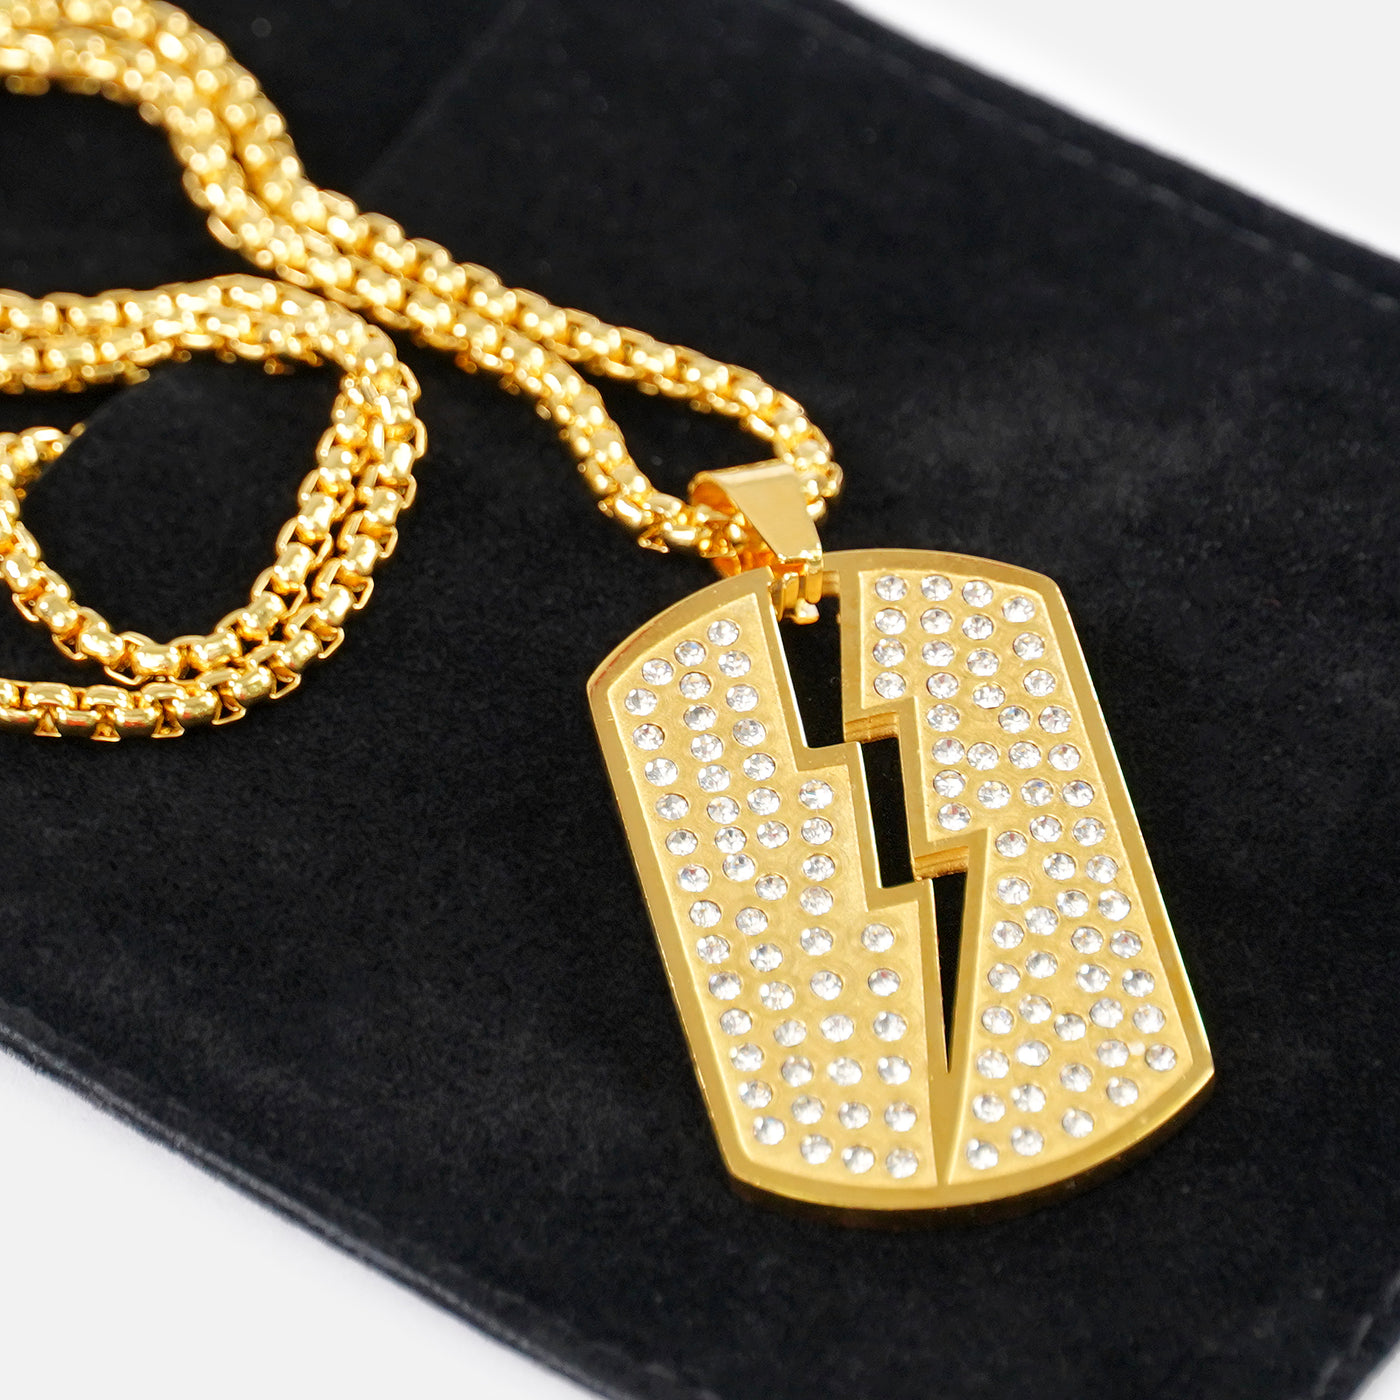 Trueno 1¾" Pendant with Chain Necklace - Gold Plated Stainless Steel